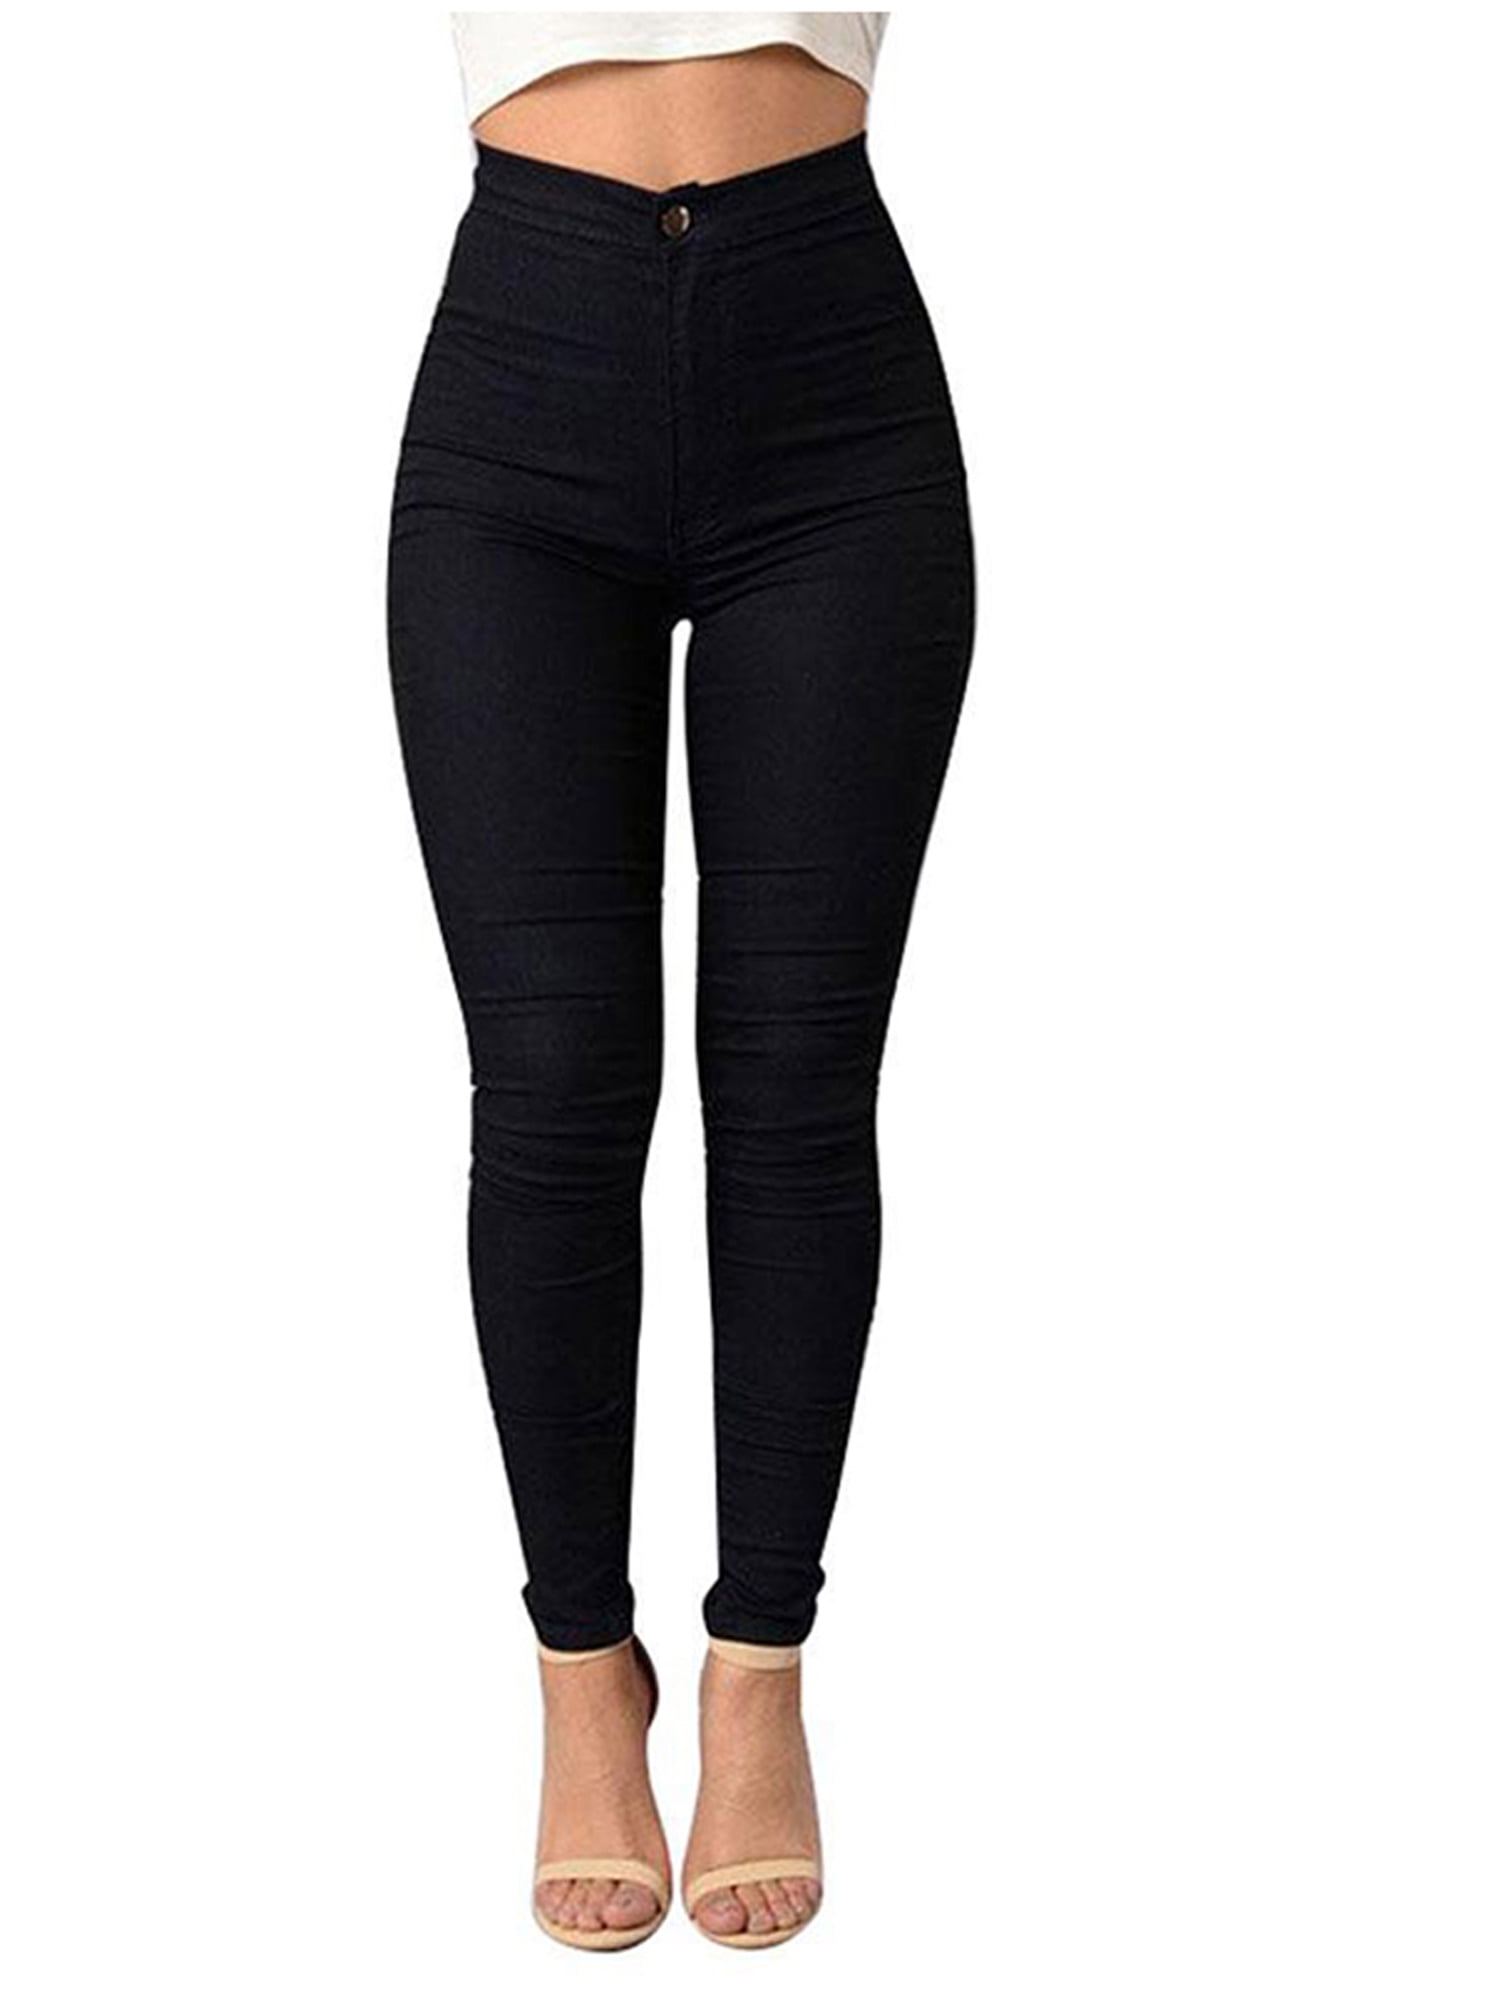 Women's High Waisted Slim Skinny Leggings Stretch Jegging Pencil Pants Trousers 